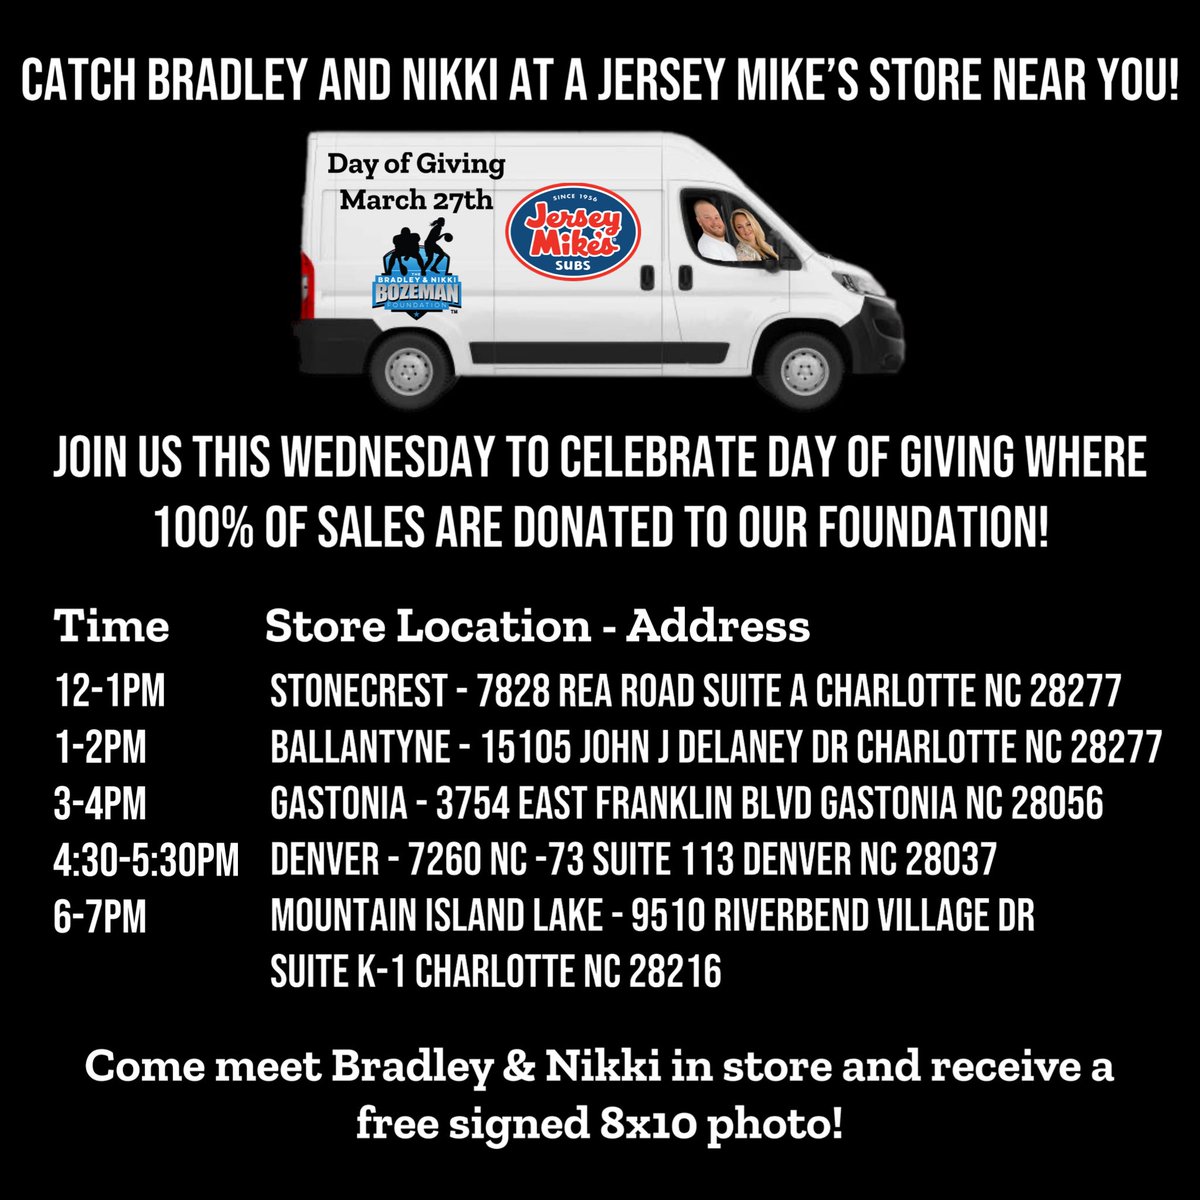 TOMORROW IS THE DAY OF GIVING!!! We hope you plan to grab a @jerseymikes sub tomorrow to support our foundation. EVERY dollar spent goes back to feeding families in our community. You read that right spending $10 on a sub tomorrow = $10 donated to BNBF! So come hungry!!! 😉